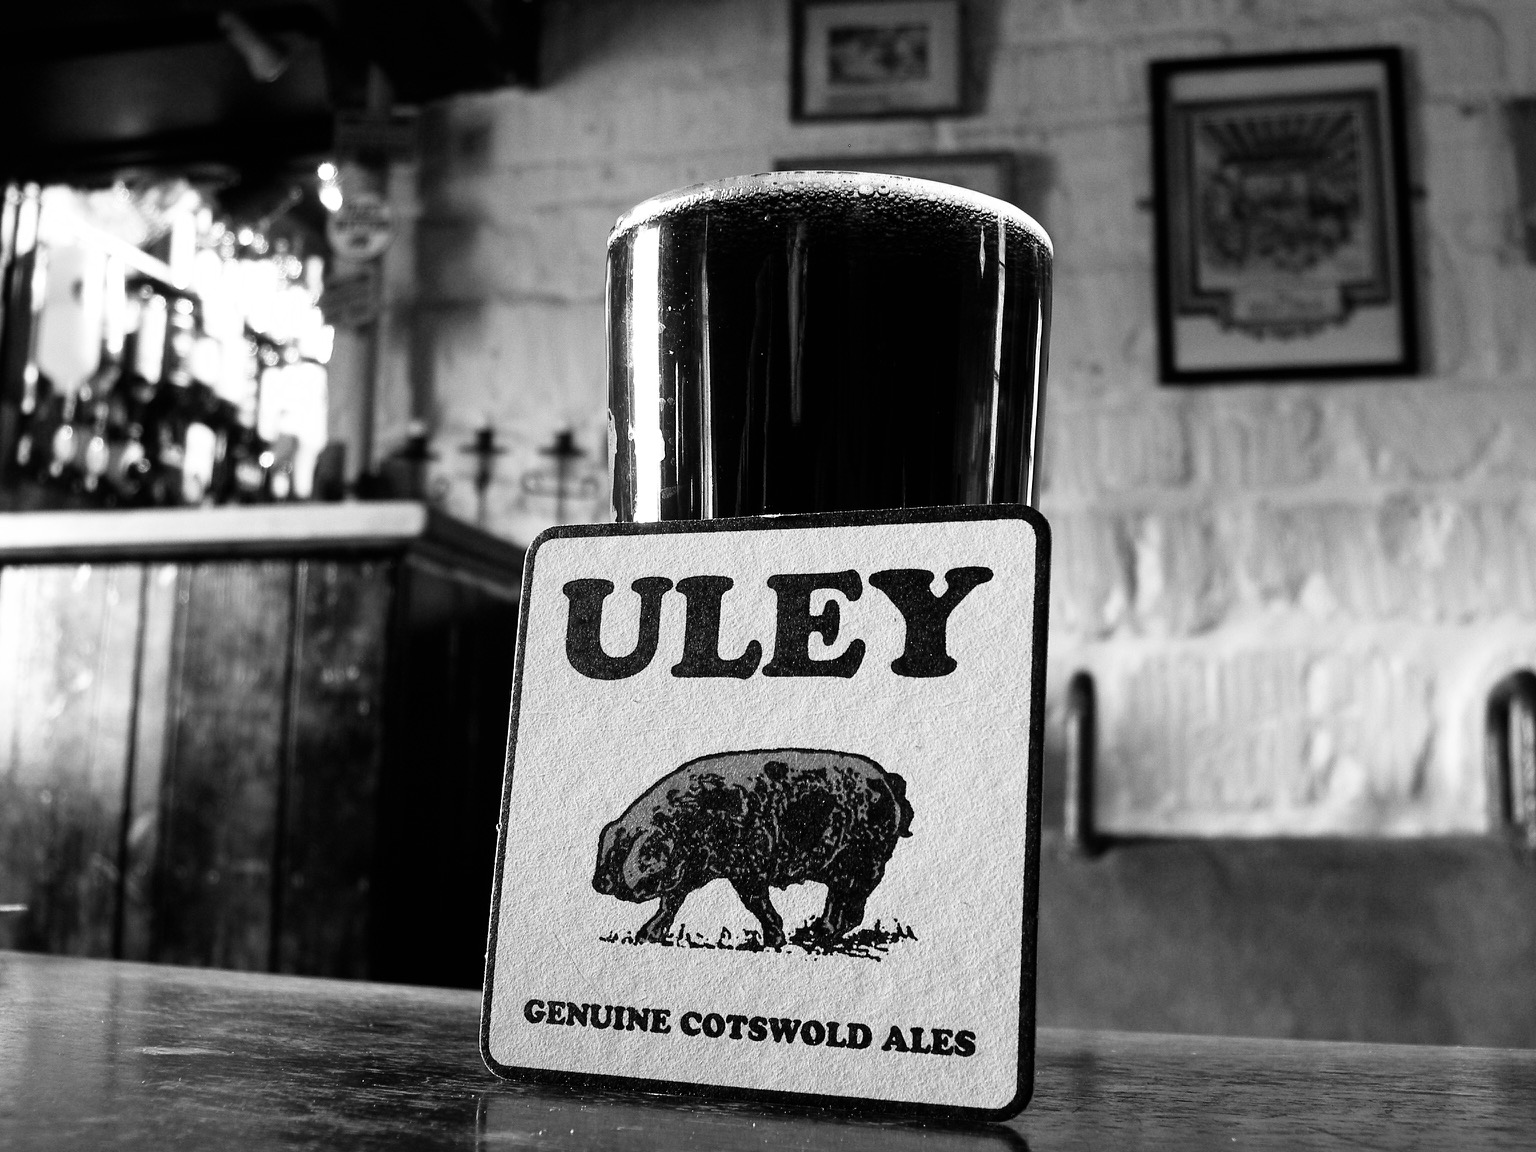 Cotswold Granny: Uley beer. Genuine Cotswold Ale. Brewed at Dursley. “Old Spot” at the Woolpack.